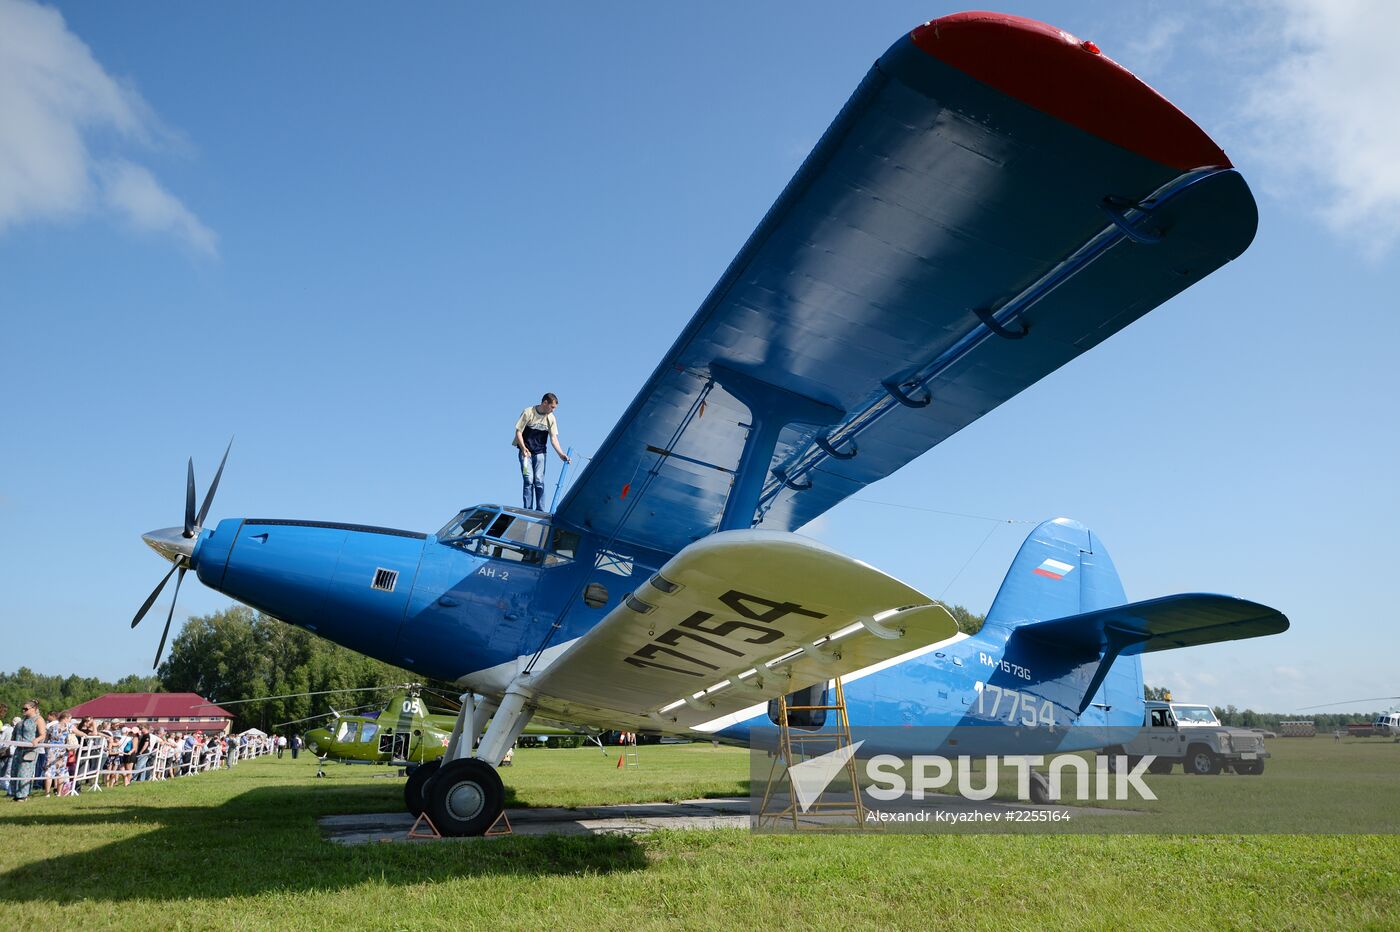 AN-2-110 upgraded at Chaplygin Aeronautical Research Institute